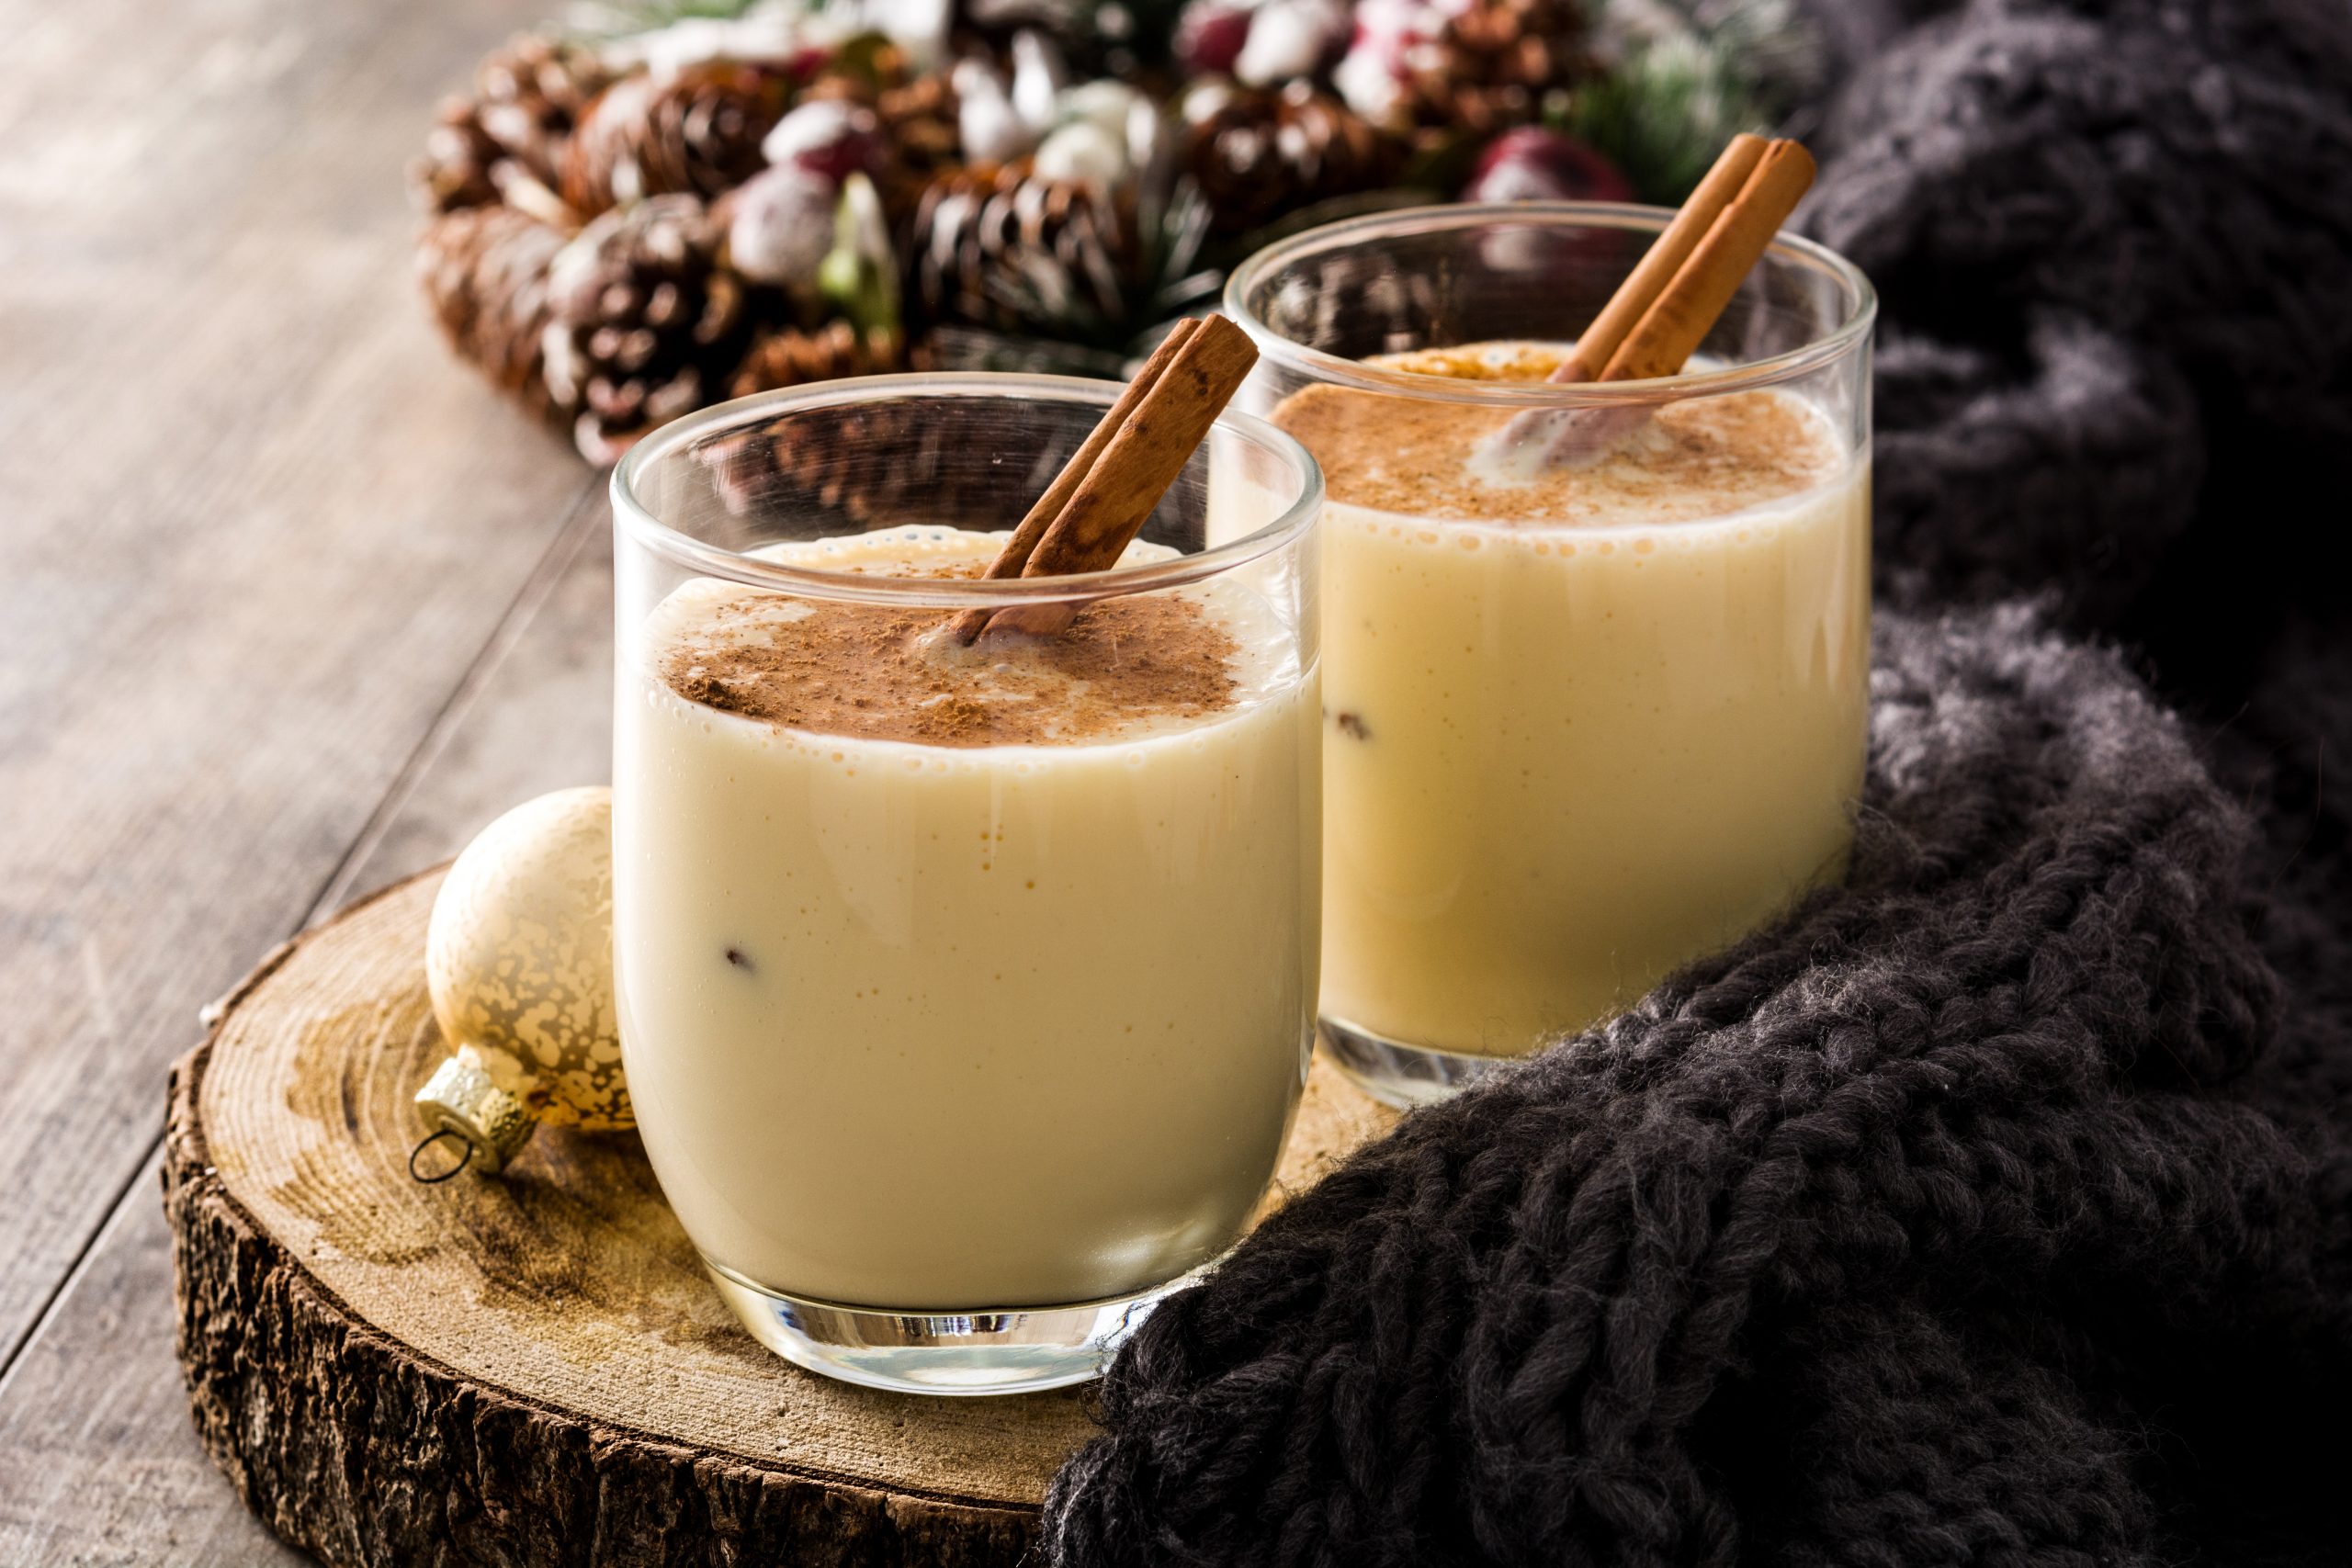 Homemade,Eggnog,With,Cinnamon,In,Glass,On,Wooden,Table.,Typical